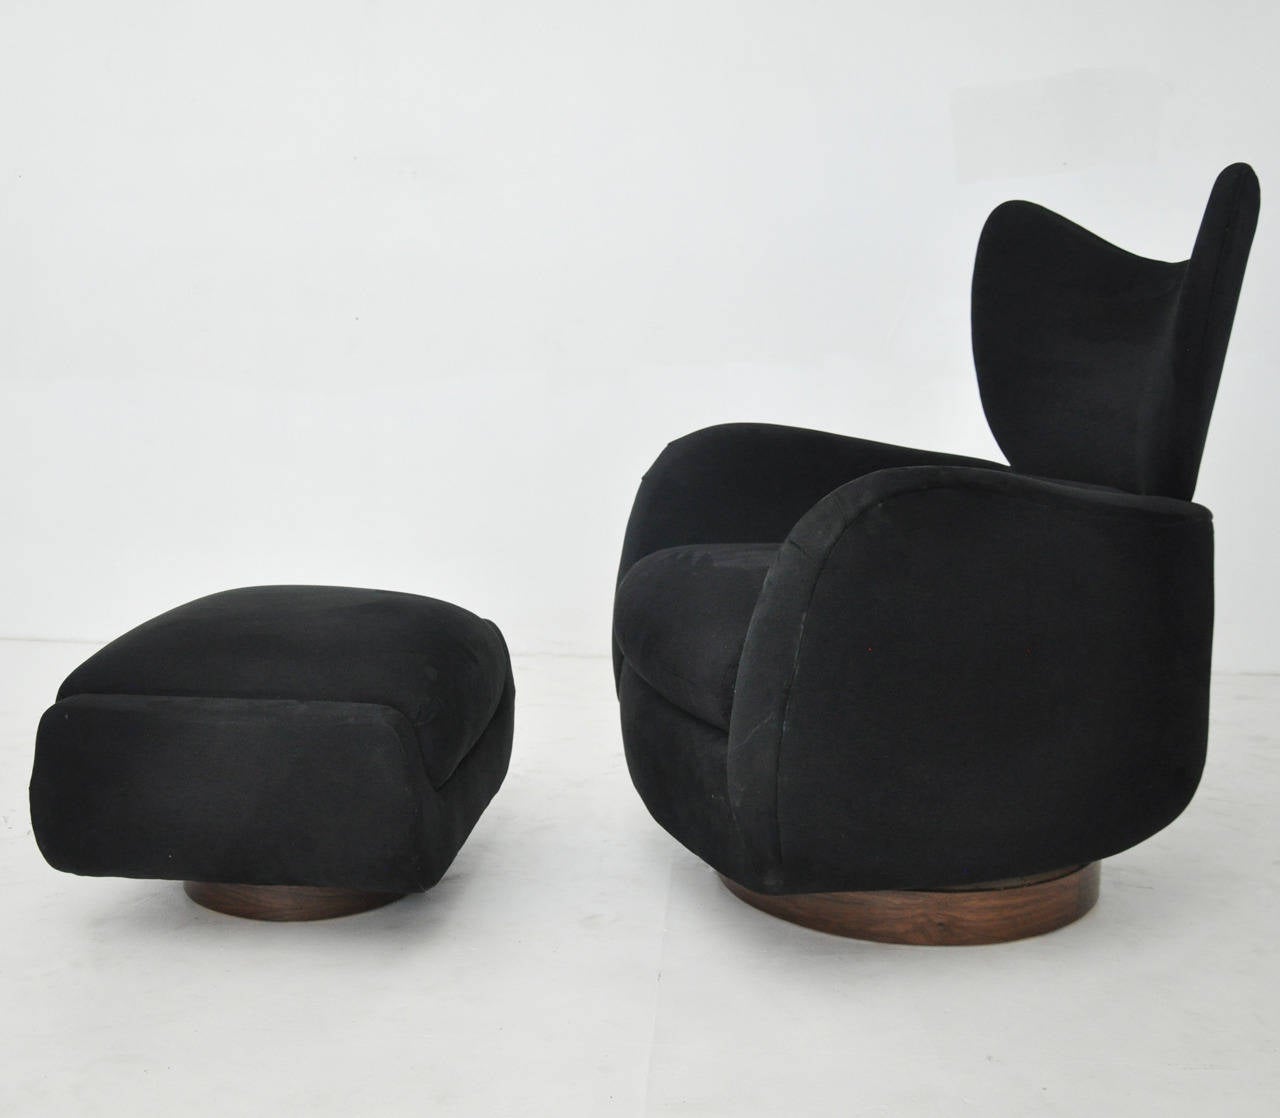 Swivel lounge chair with ottoman. Designed by Vladimir Kagan for Directional. Original upholstery with walnut bases. Chair swivels and rocks.